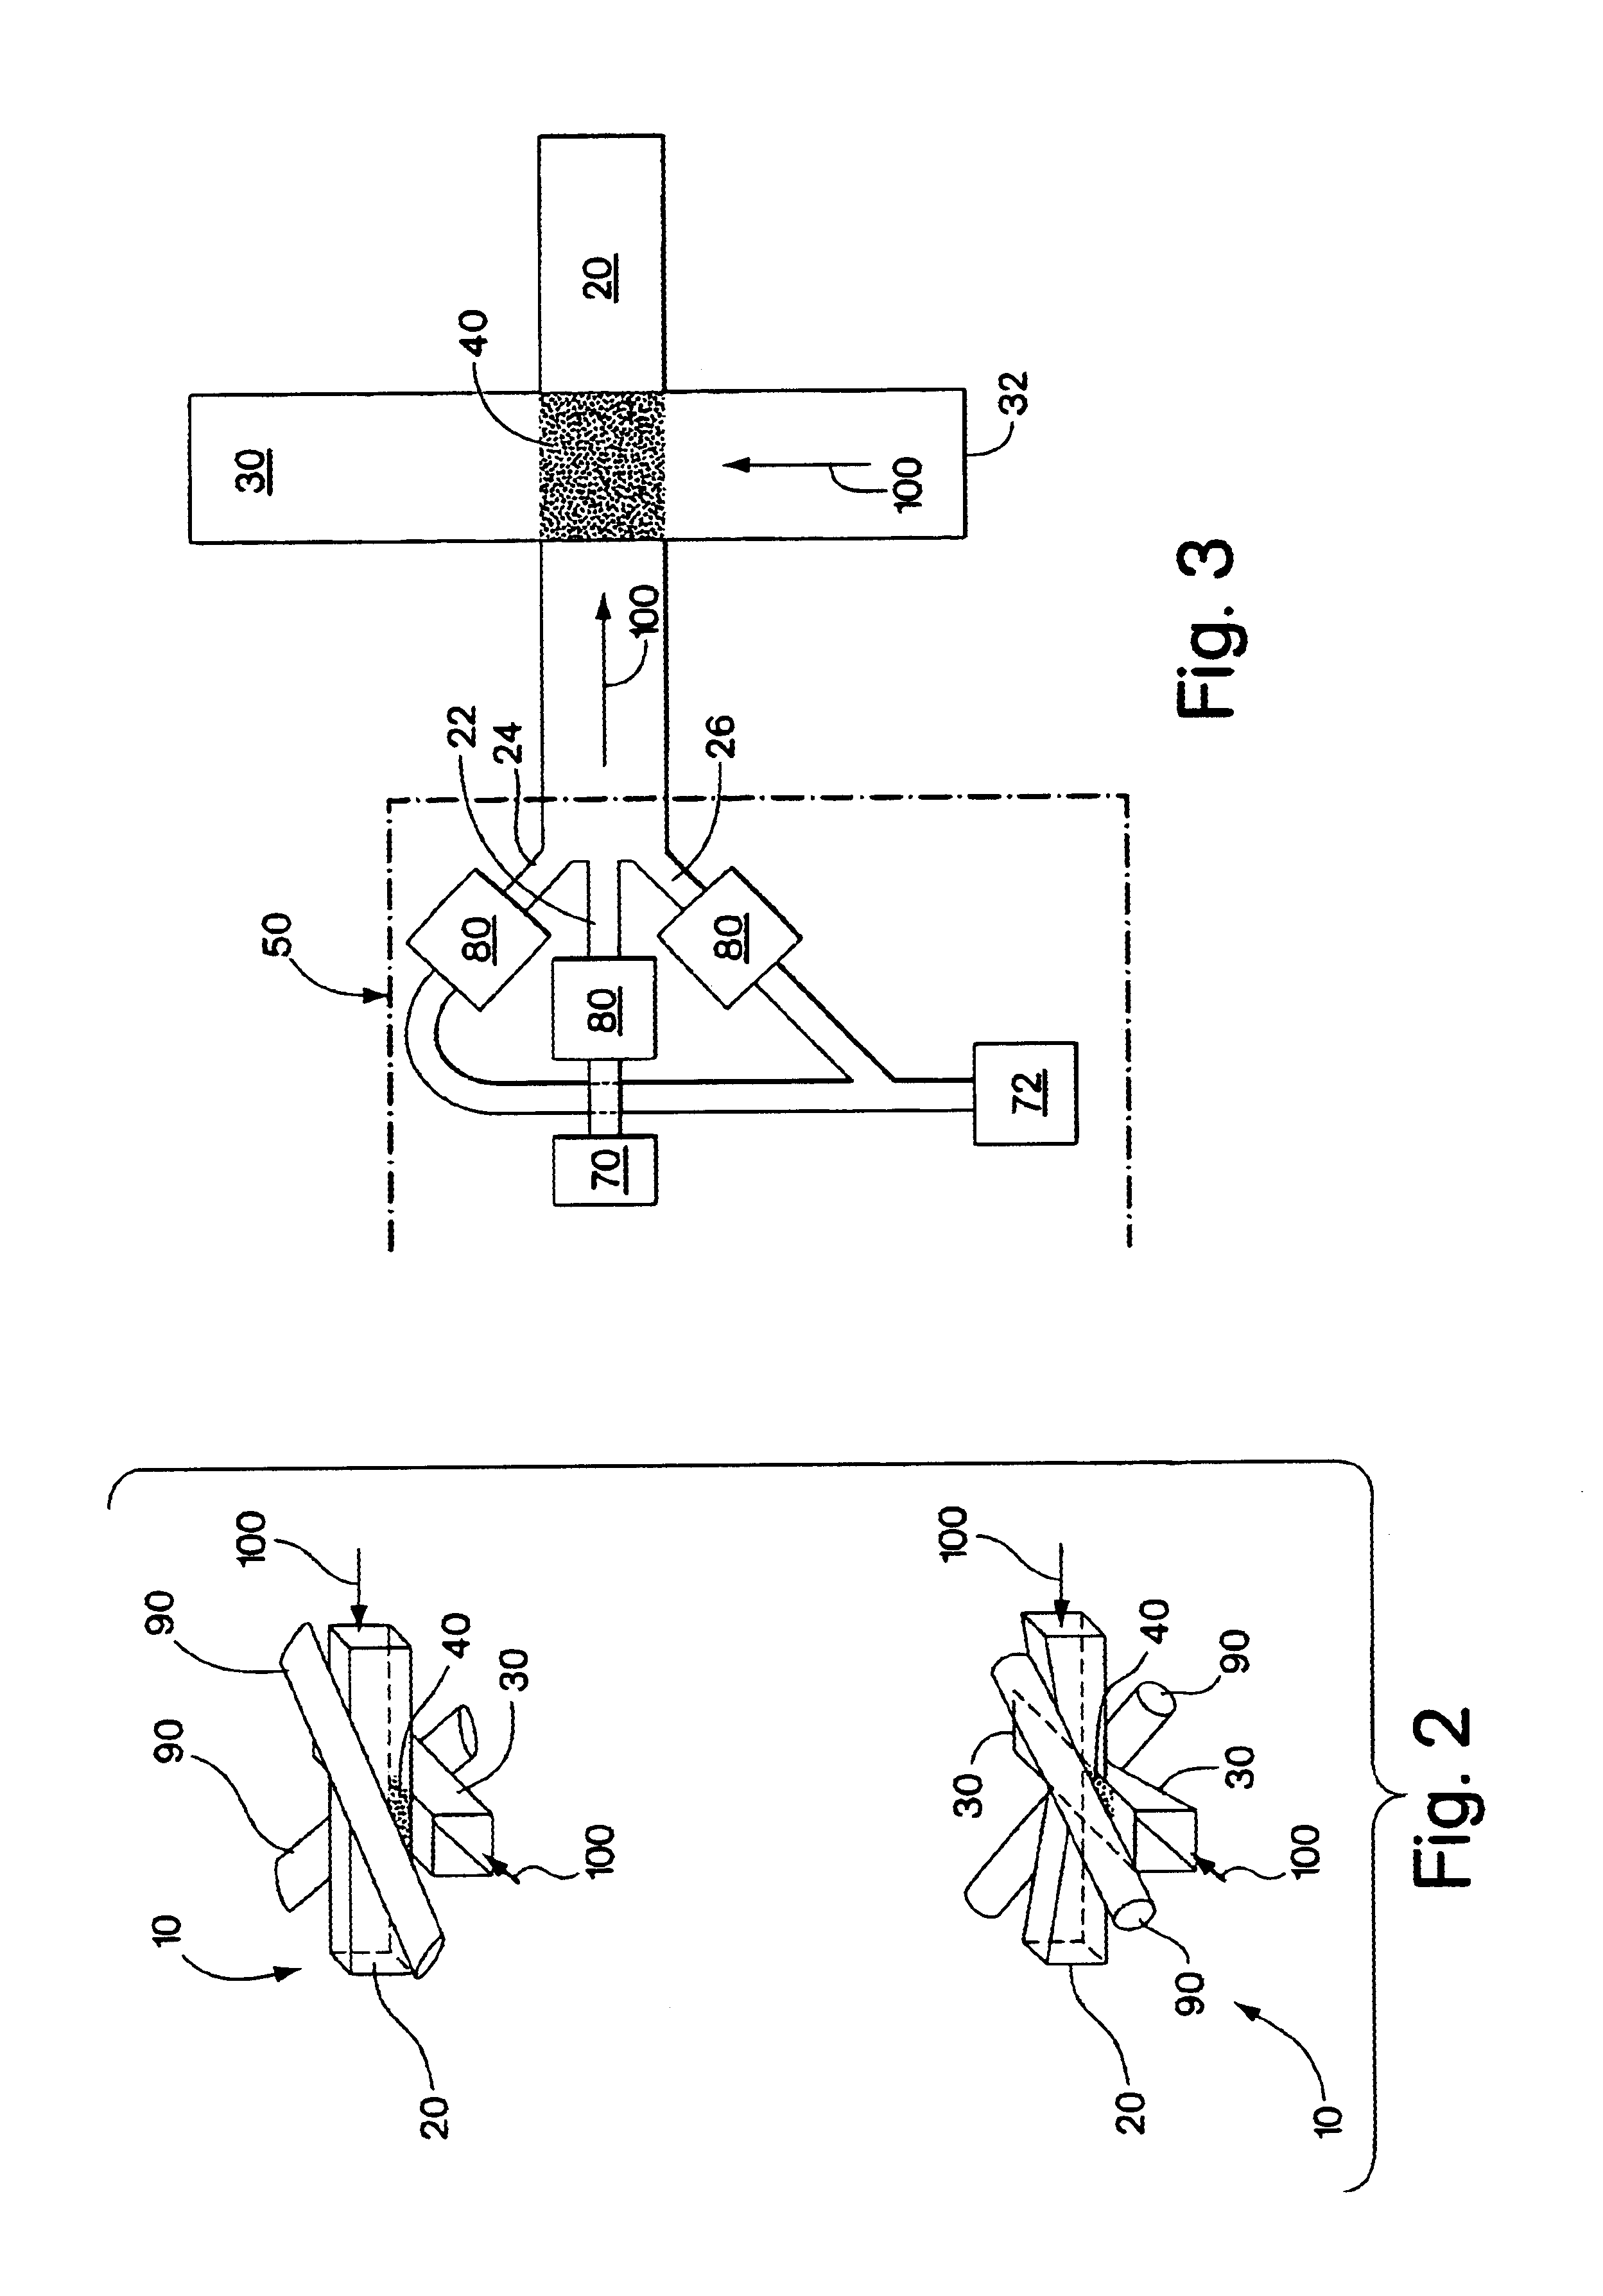 Fluidic switches and methods for controlling flow in fluidic systems